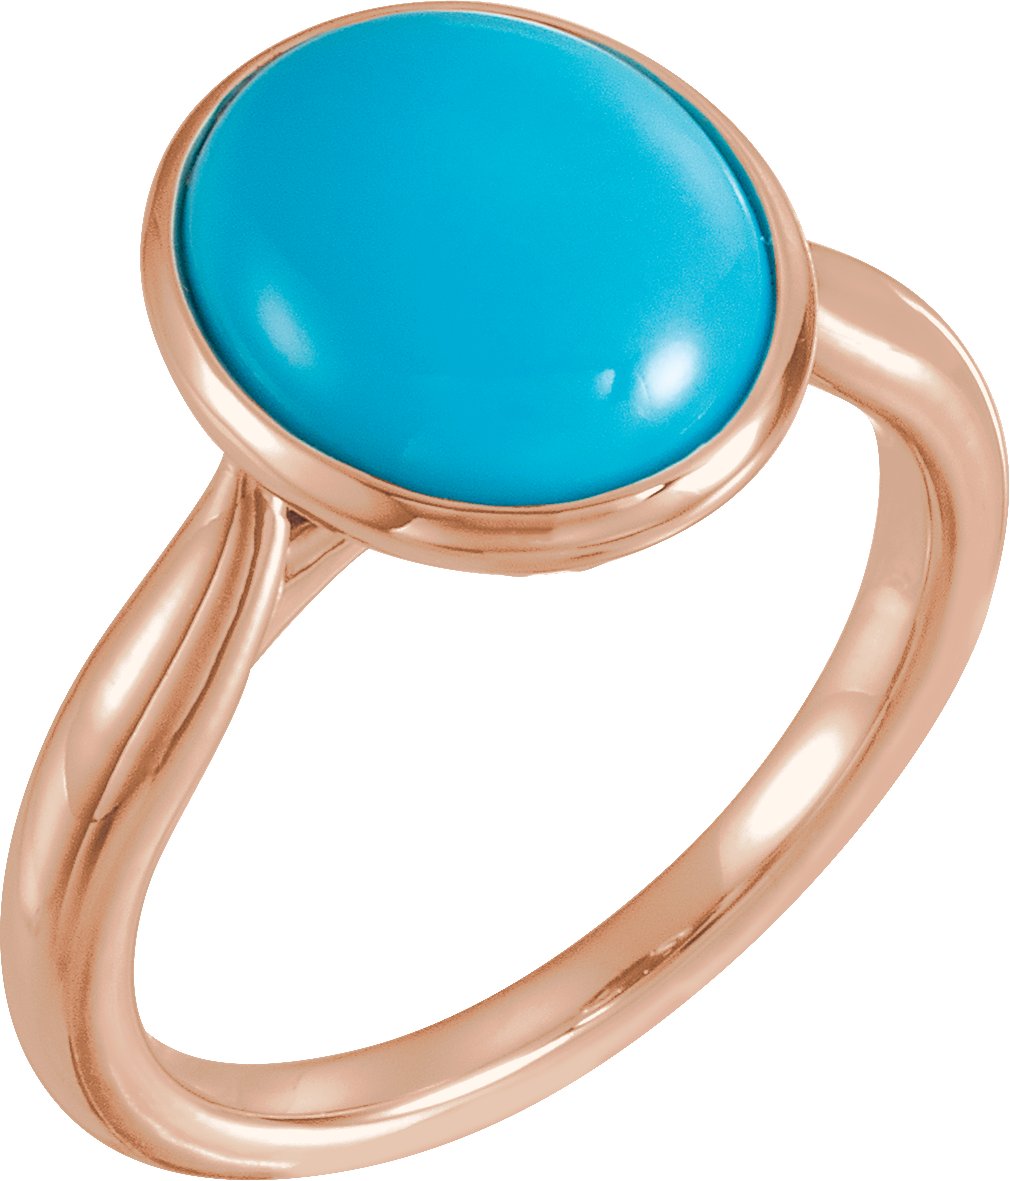 14K Rose 12x10 mm Natural Turquoise Cabochon Ring